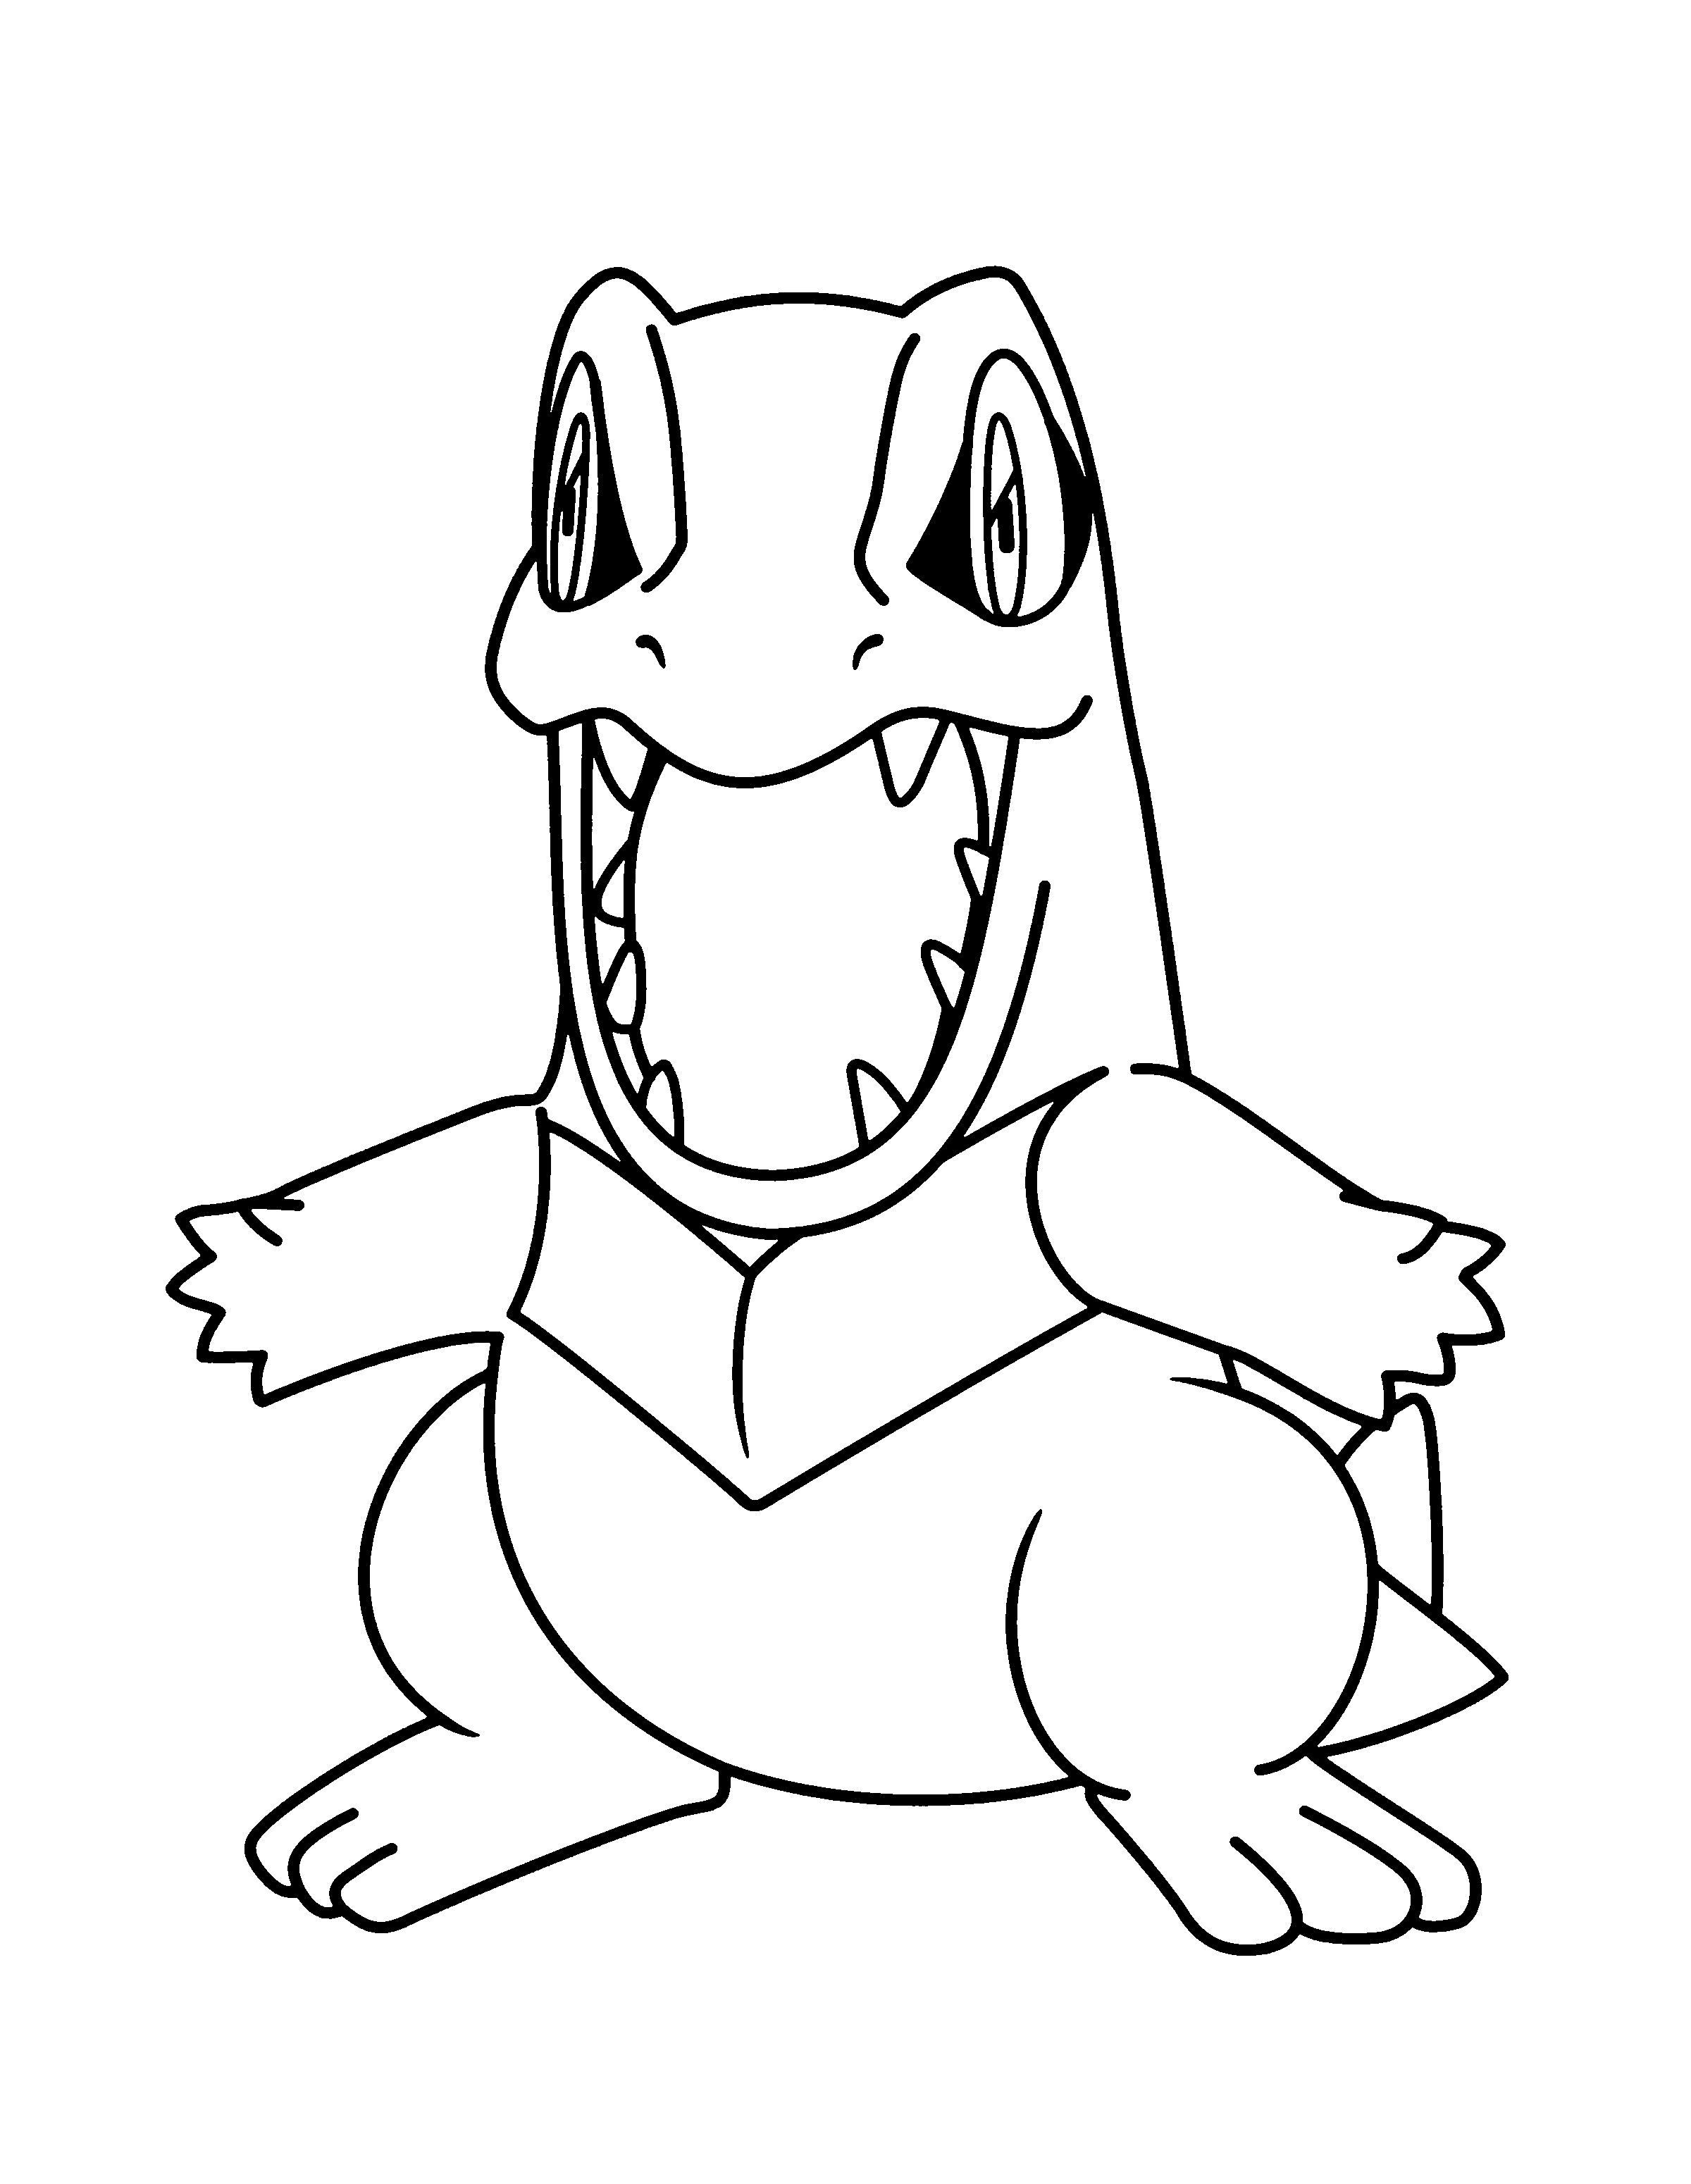 coloring-page-pokemon-coloring-pages-613